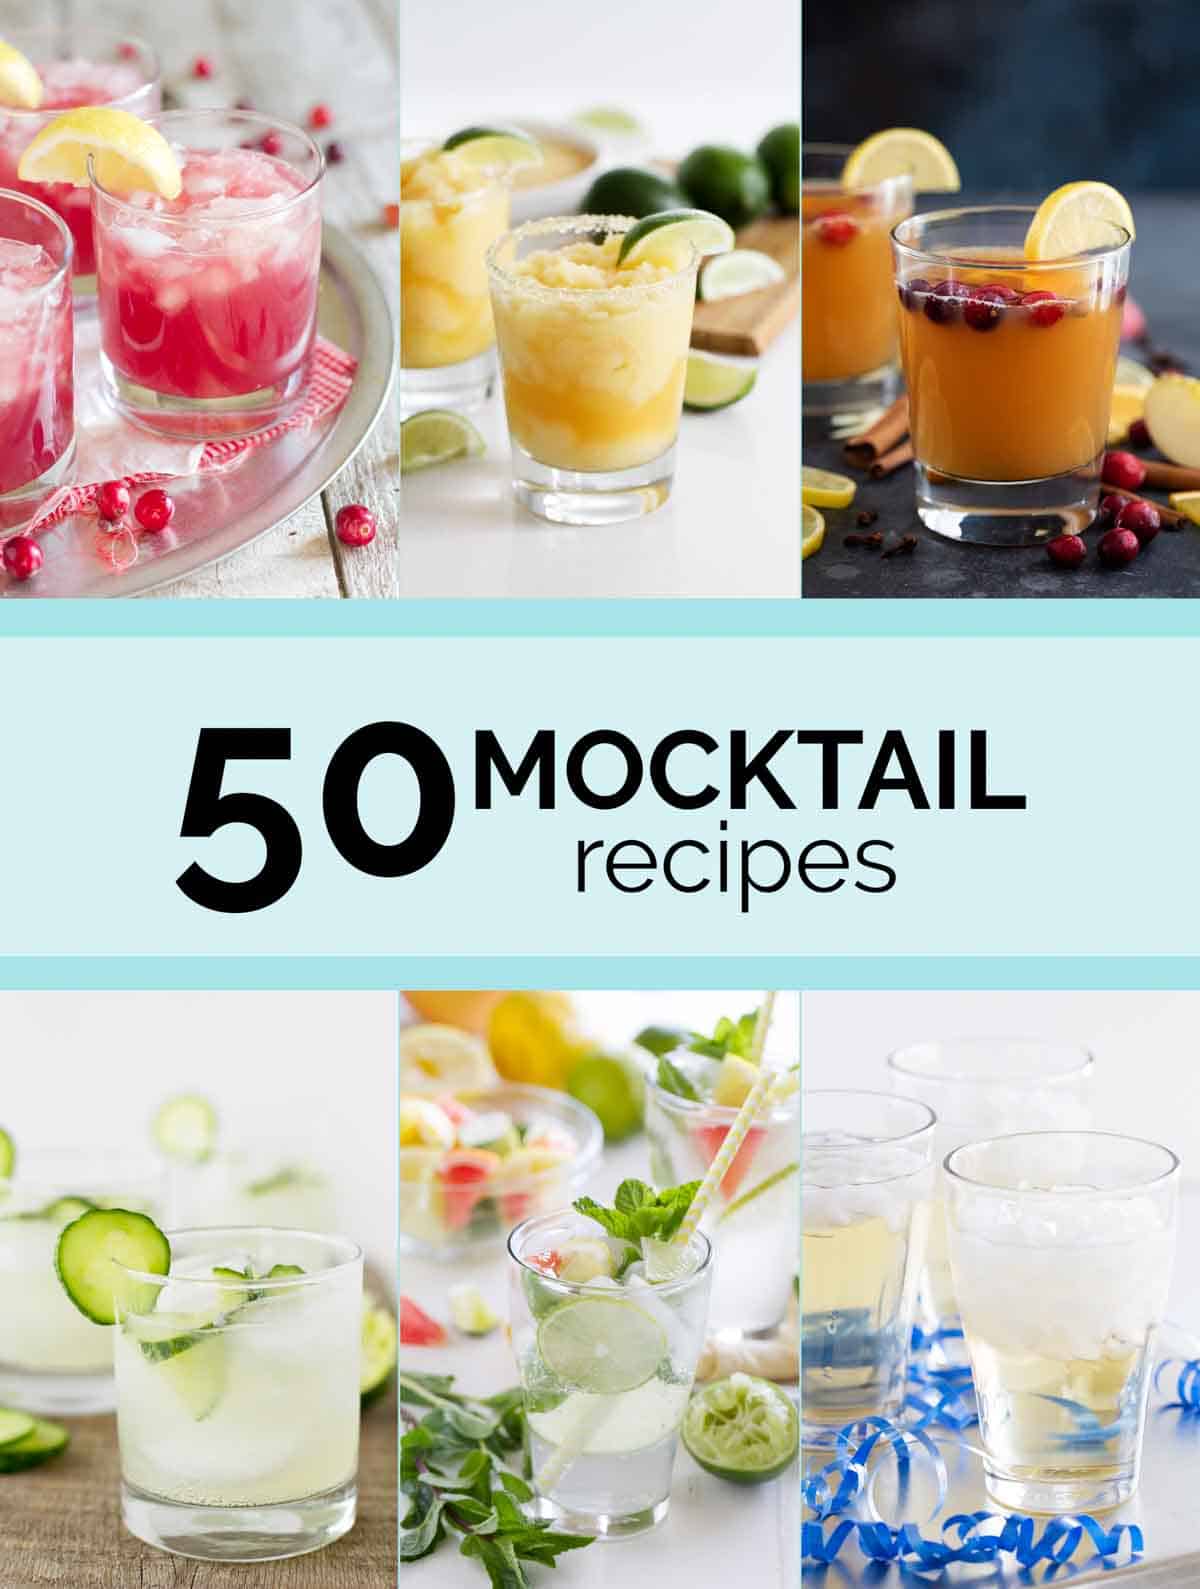 Tropical Mocktail Recipe - Making an Easy Non Alcoholic Summer Mocktail